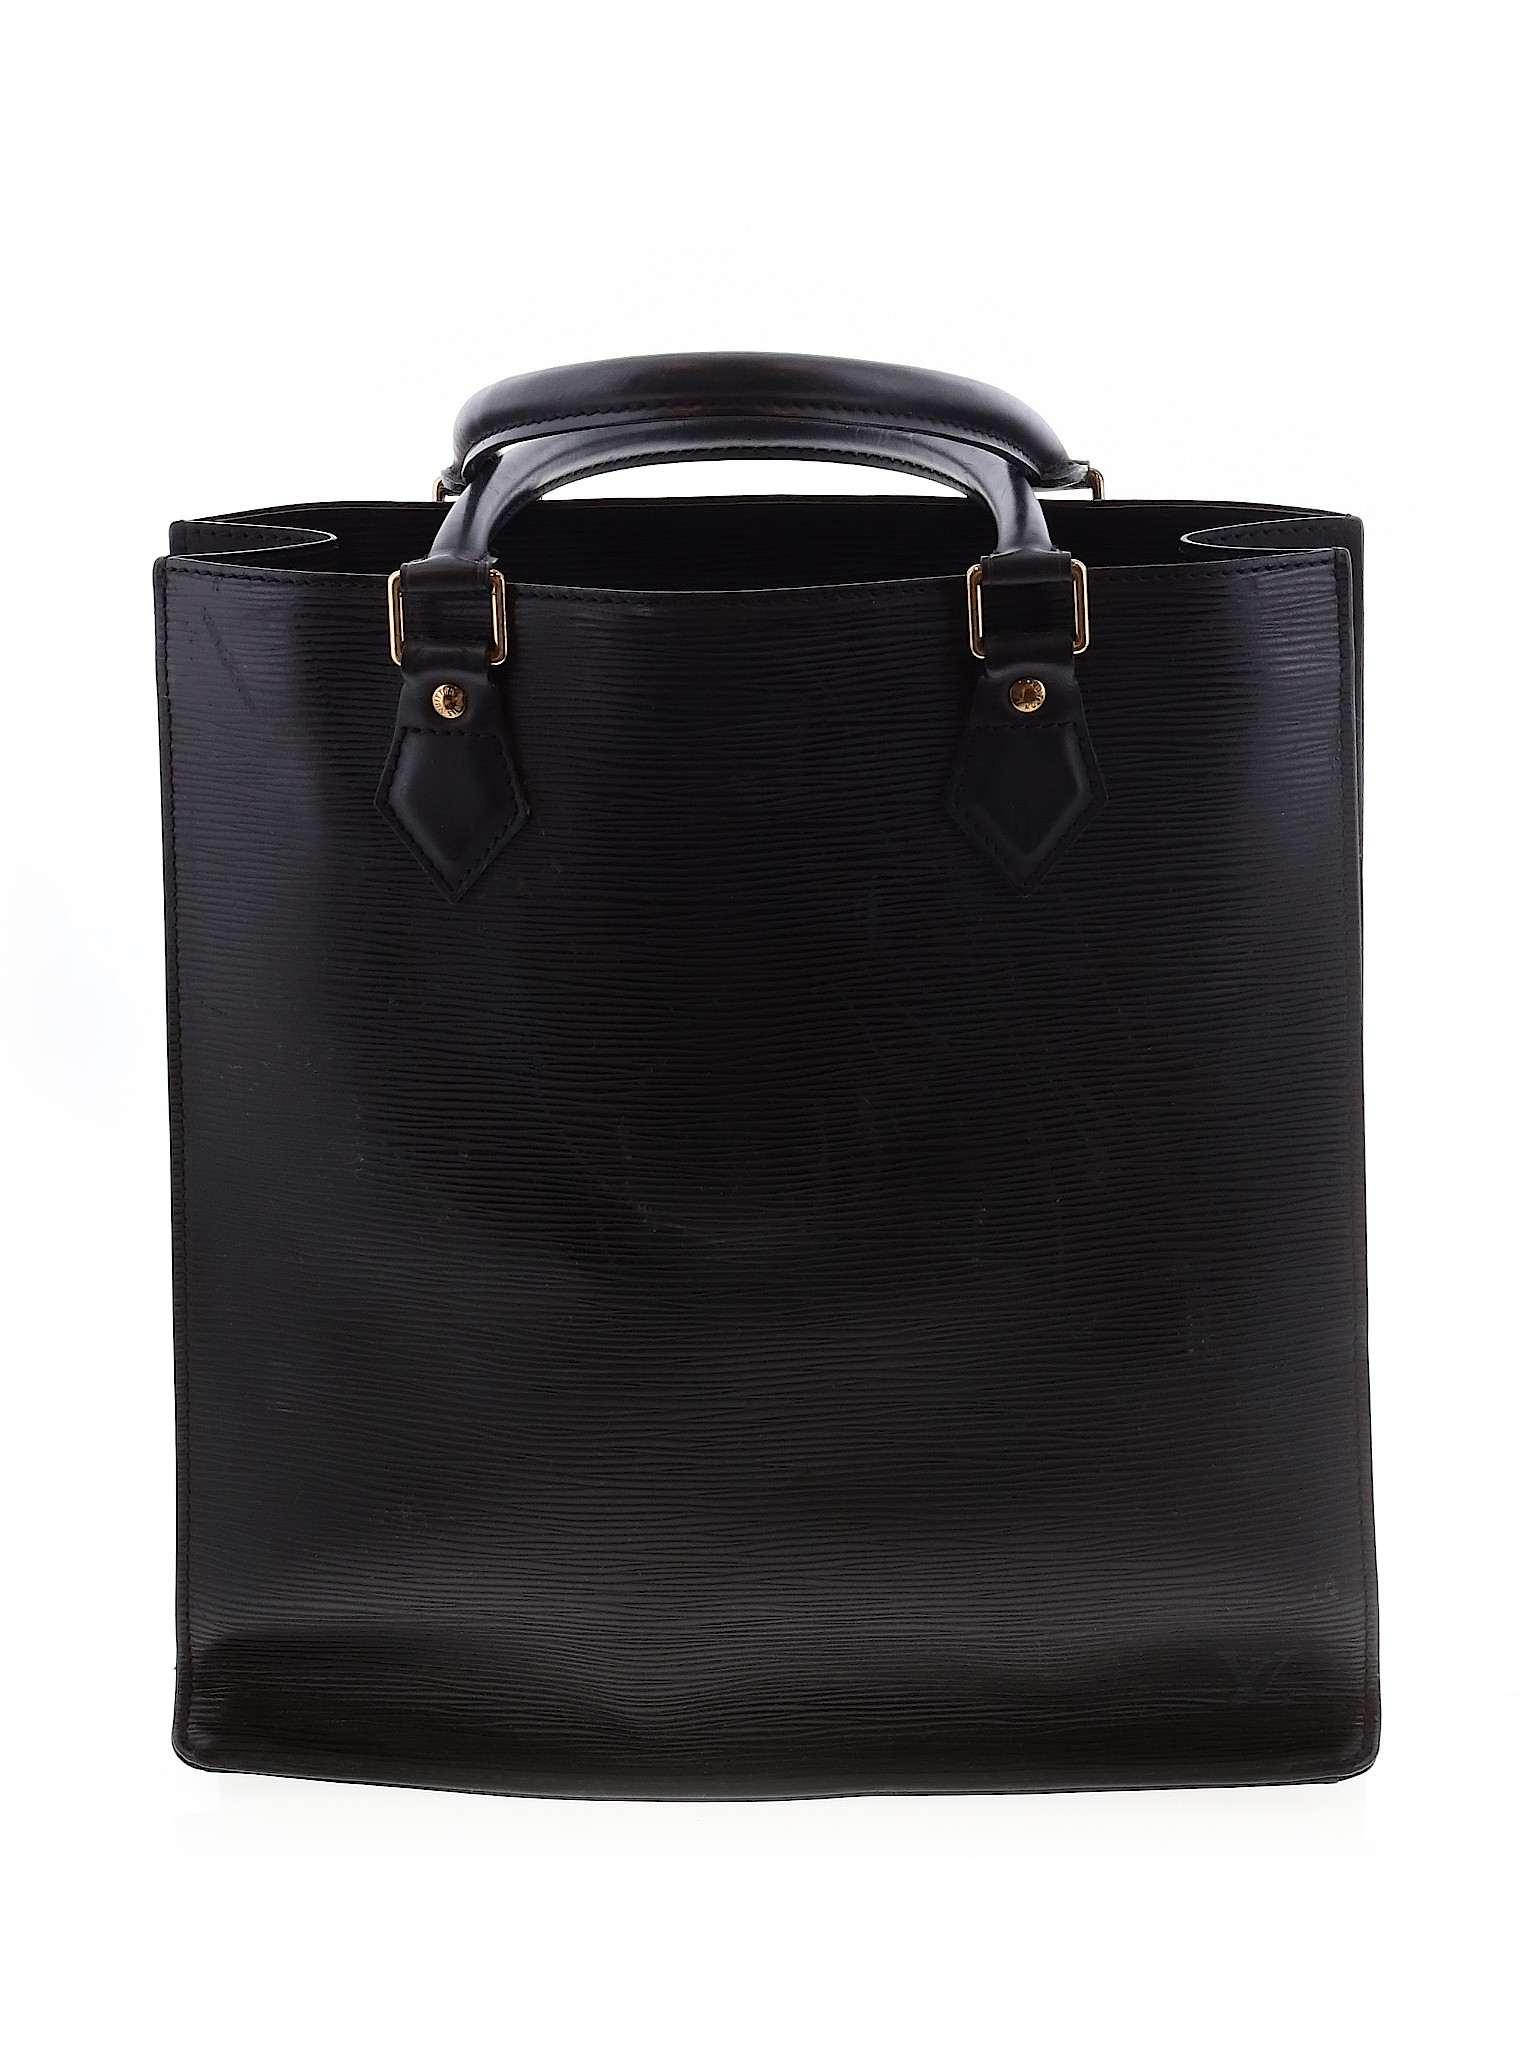 Louis Vuitton Solid Black Tote One Size - 49% off | thredUP